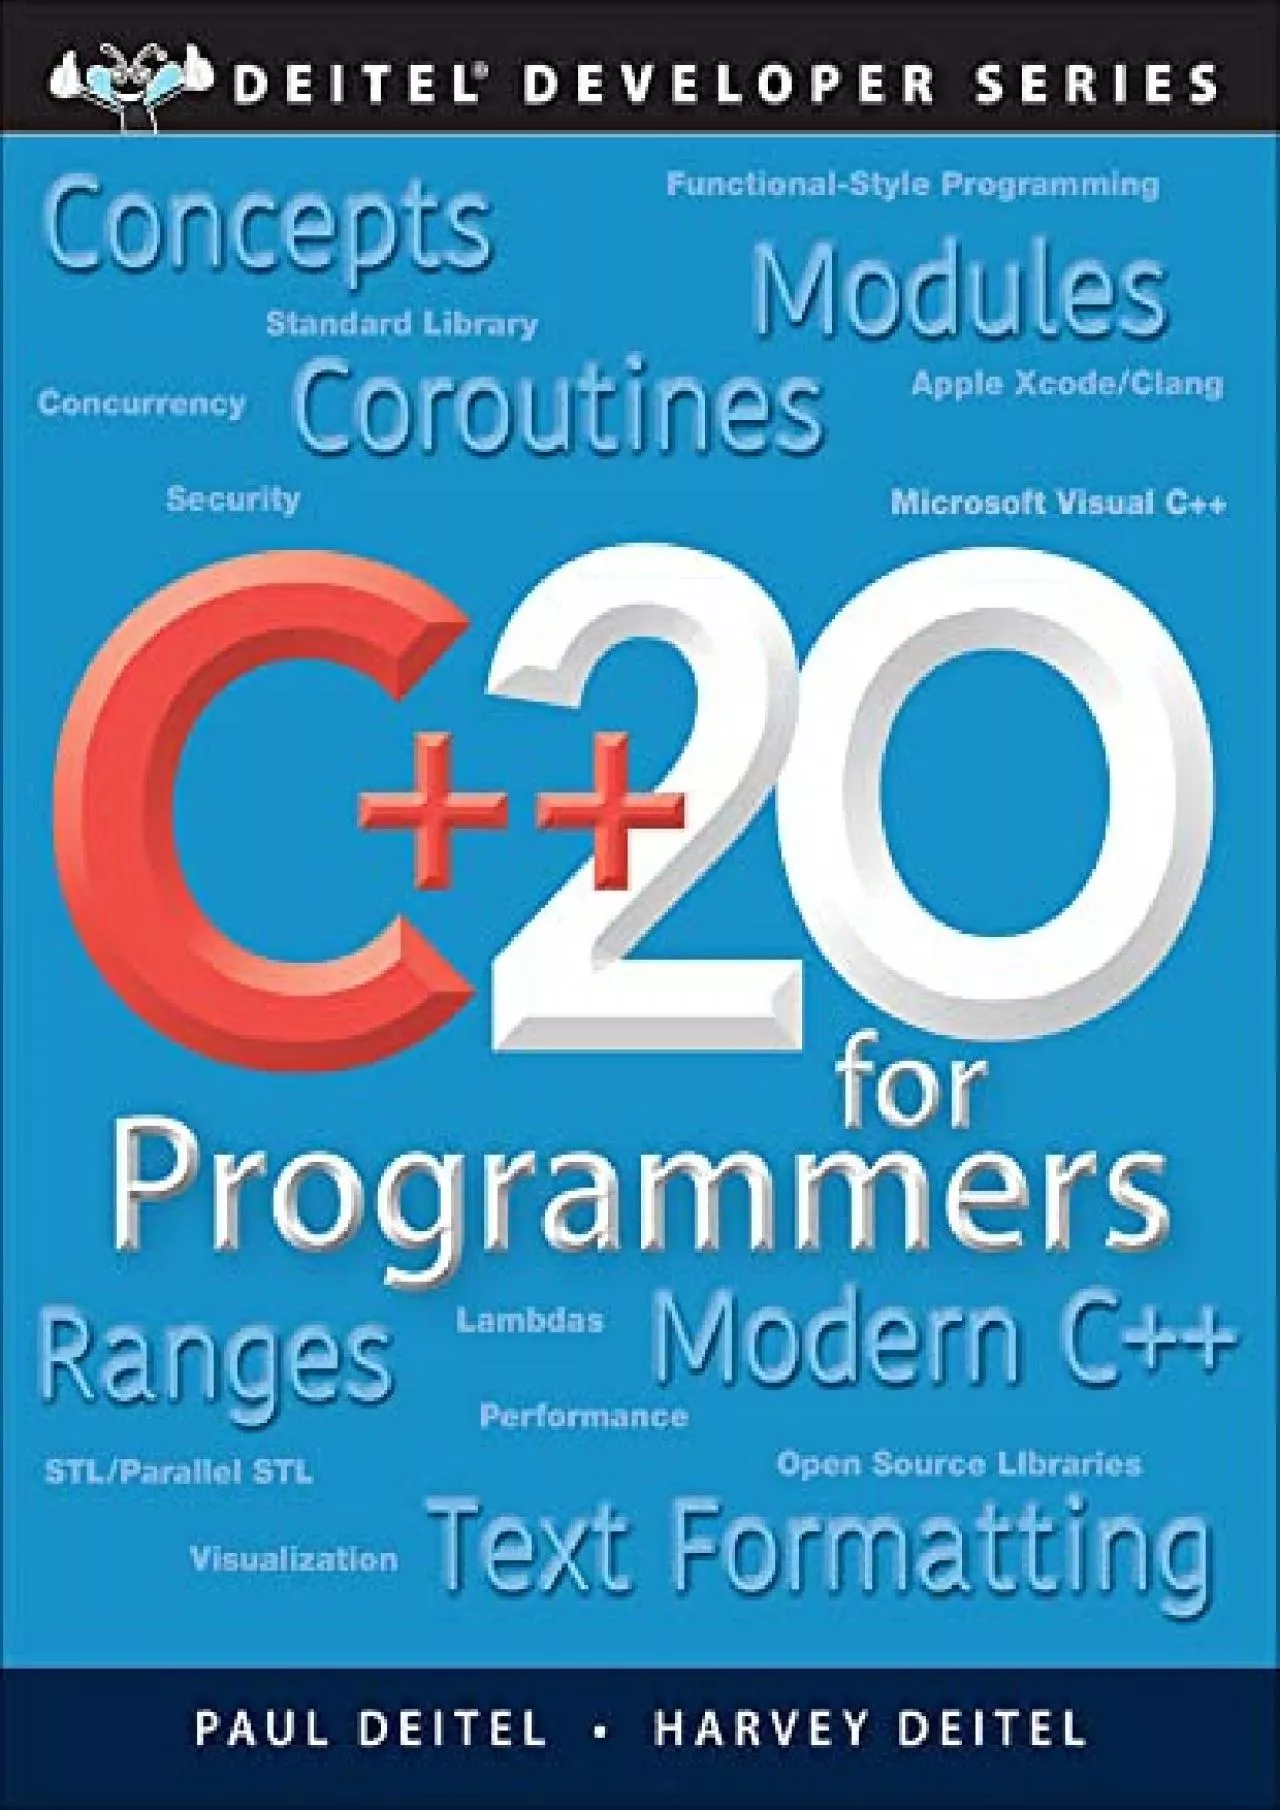 [READ]-C++20 for Programmers: An Objects-Natural Approach (Deitel Developer Series)